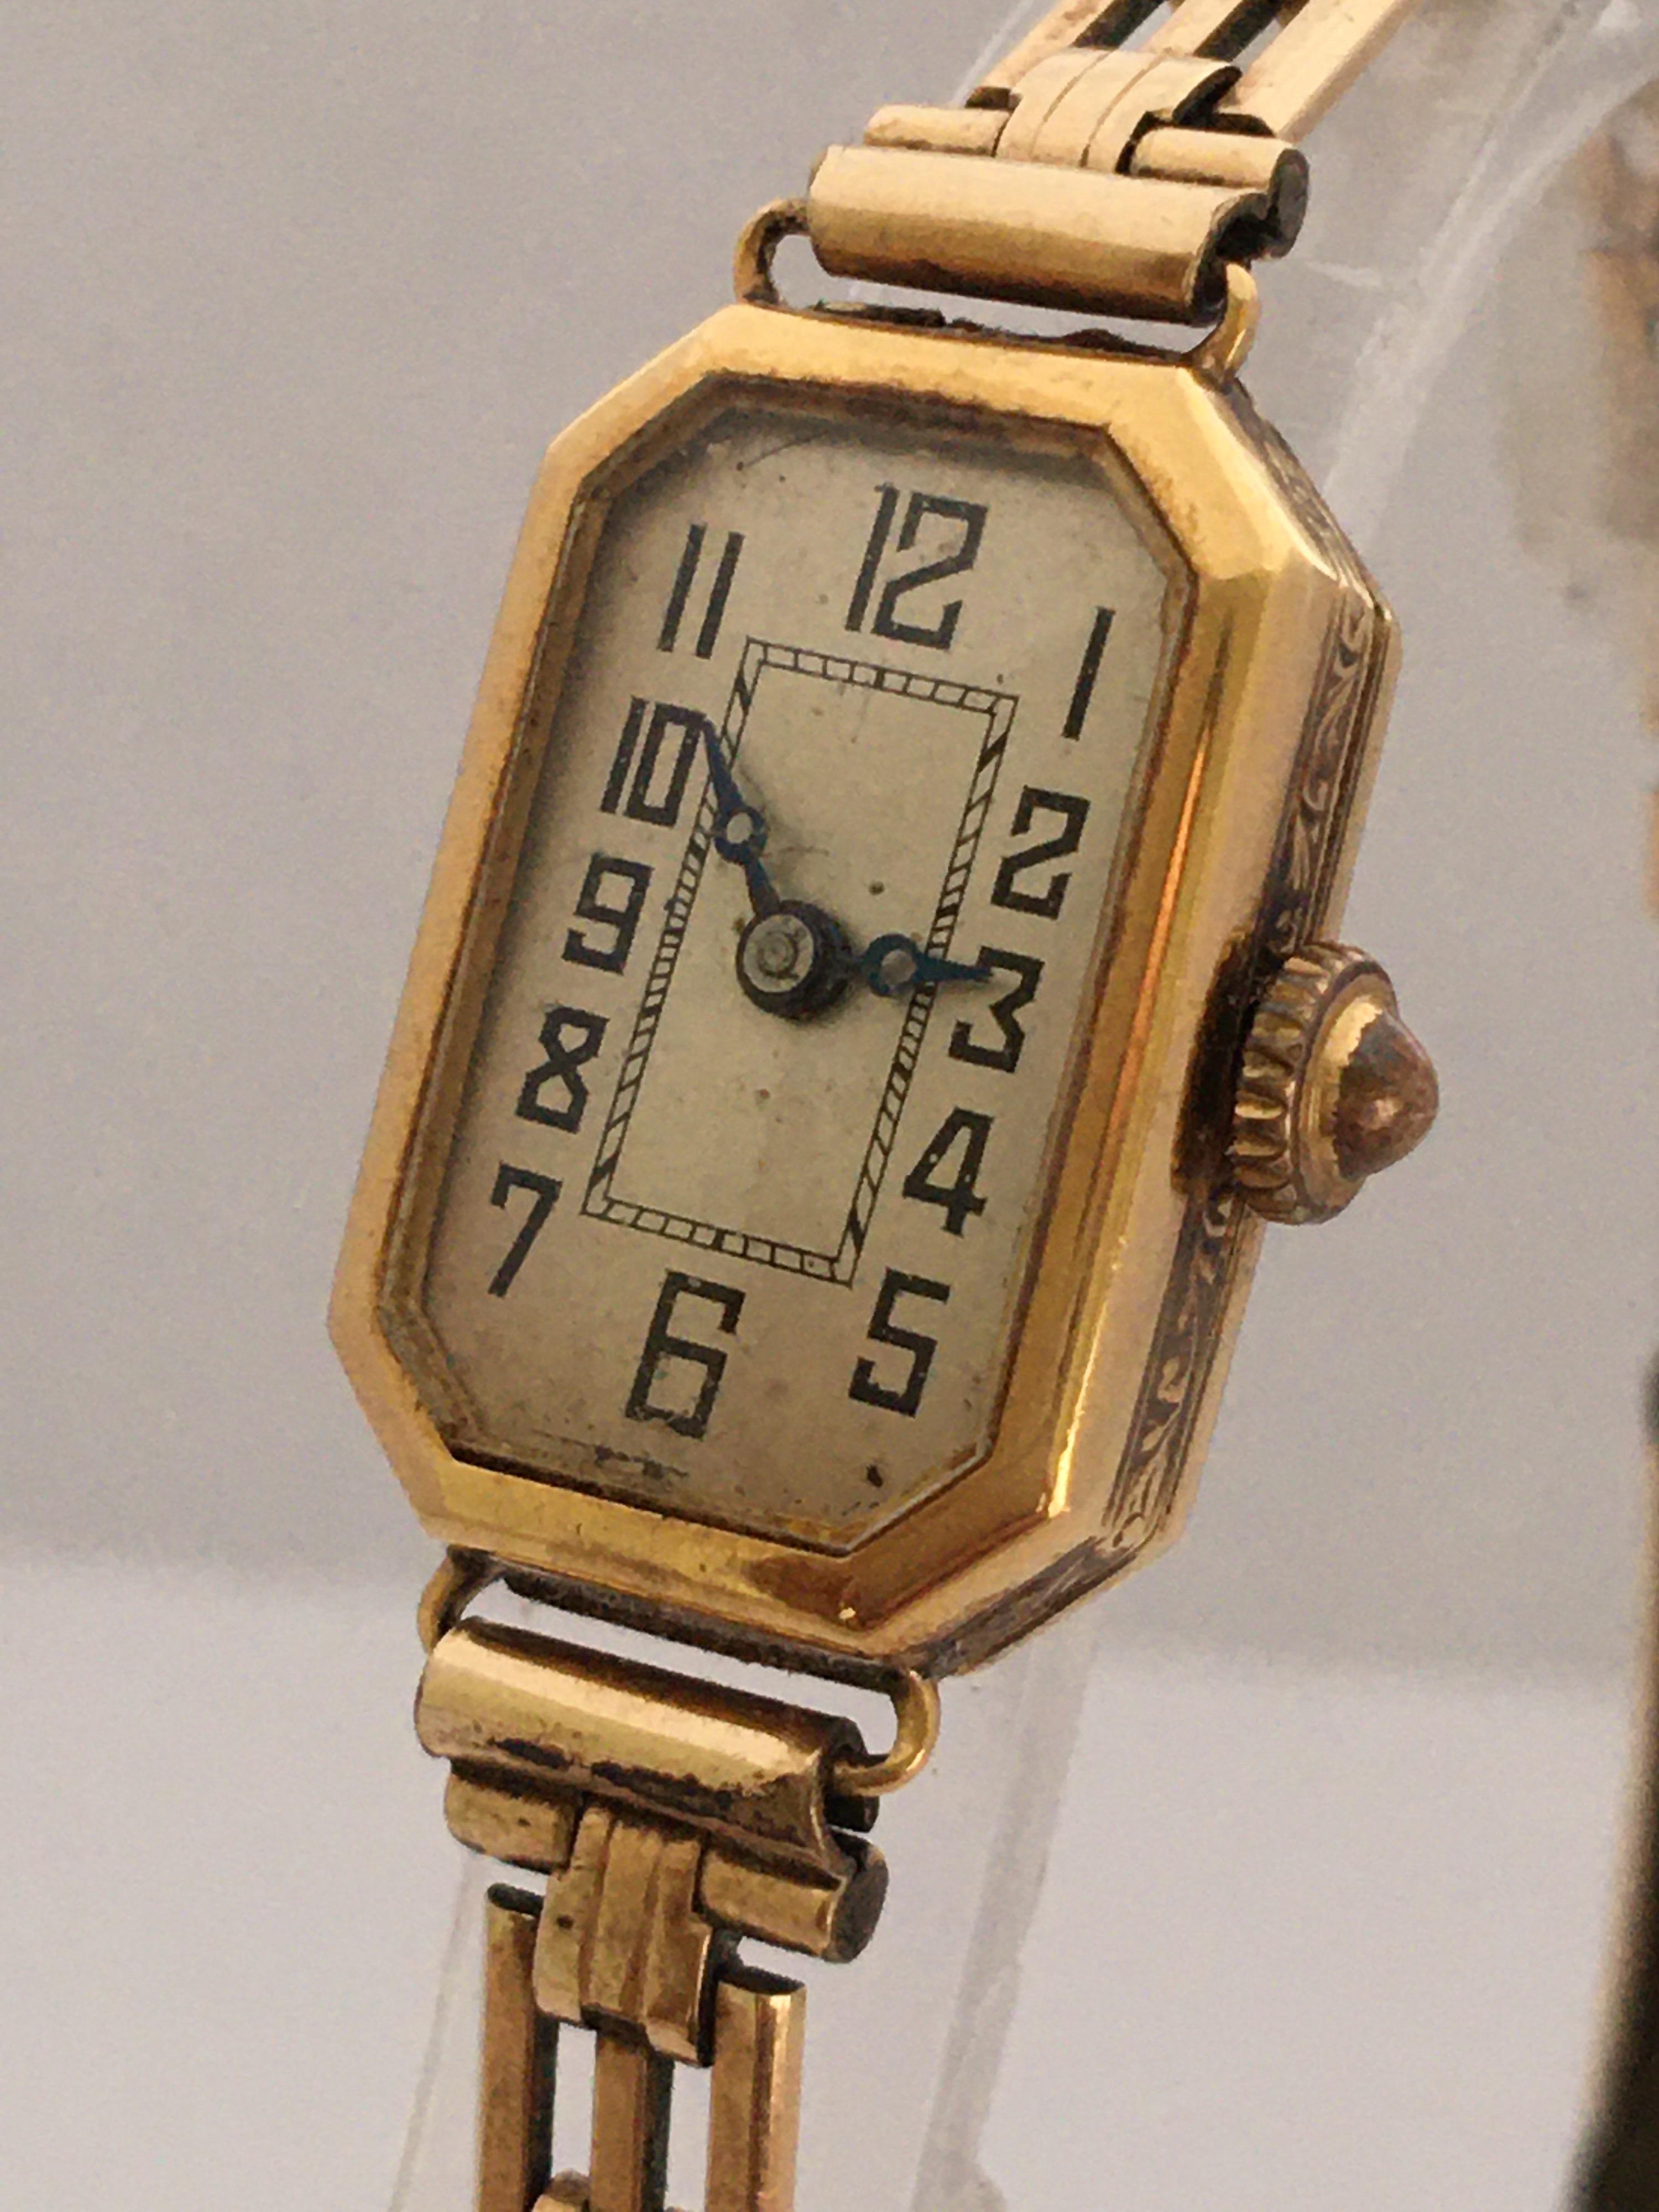 This beautiful vintage ladies hand winding gold watch is in good condition condition and it is running well. It has recently been serviced. Visible signs of ageing and wear with light and tiny scratches on the gold watch case as shown. 

Please